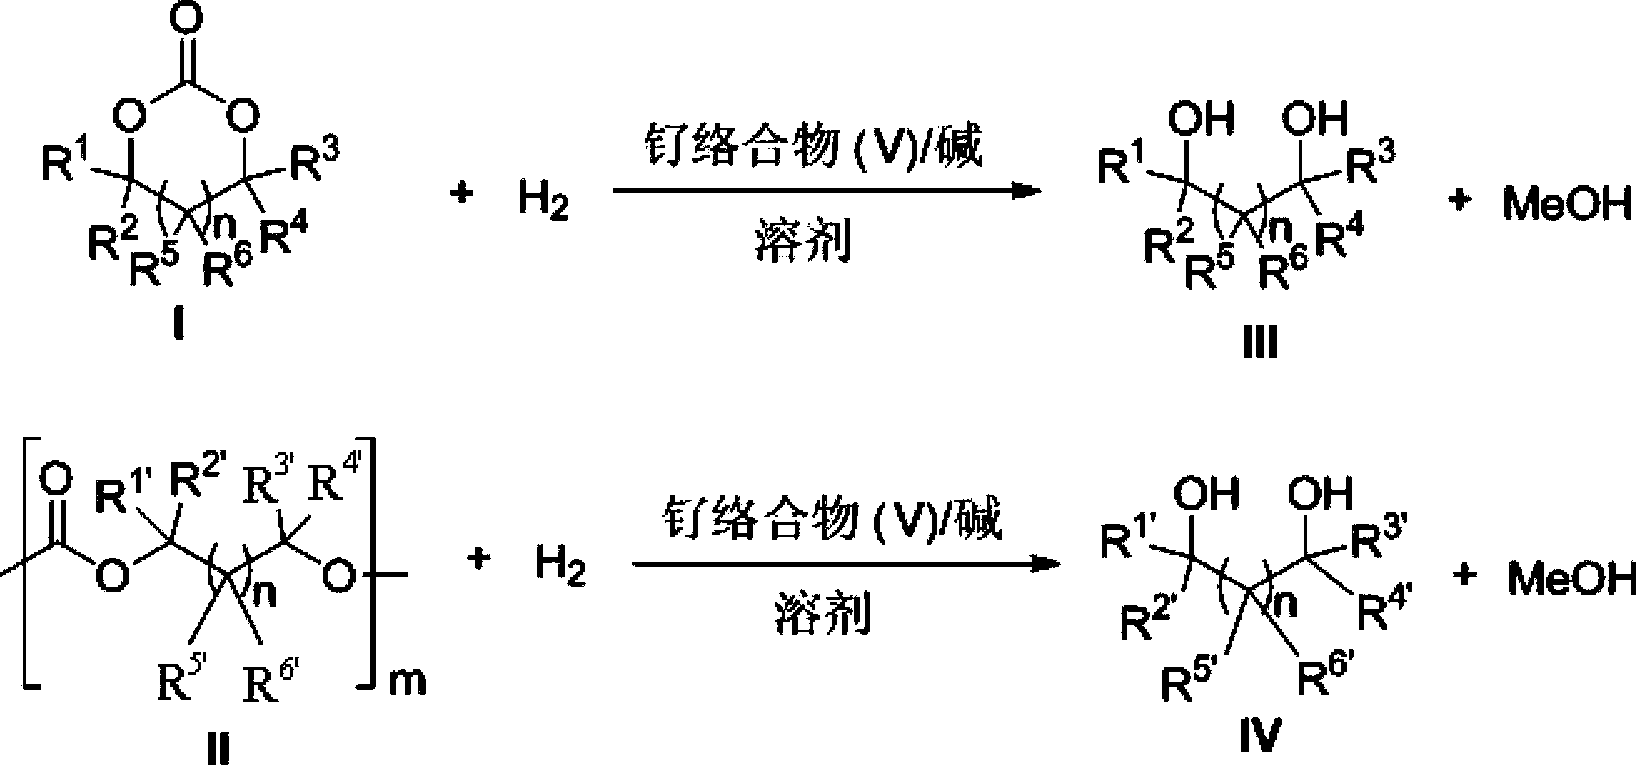 Novel ruthenium complex and method for preparing methanol and diol